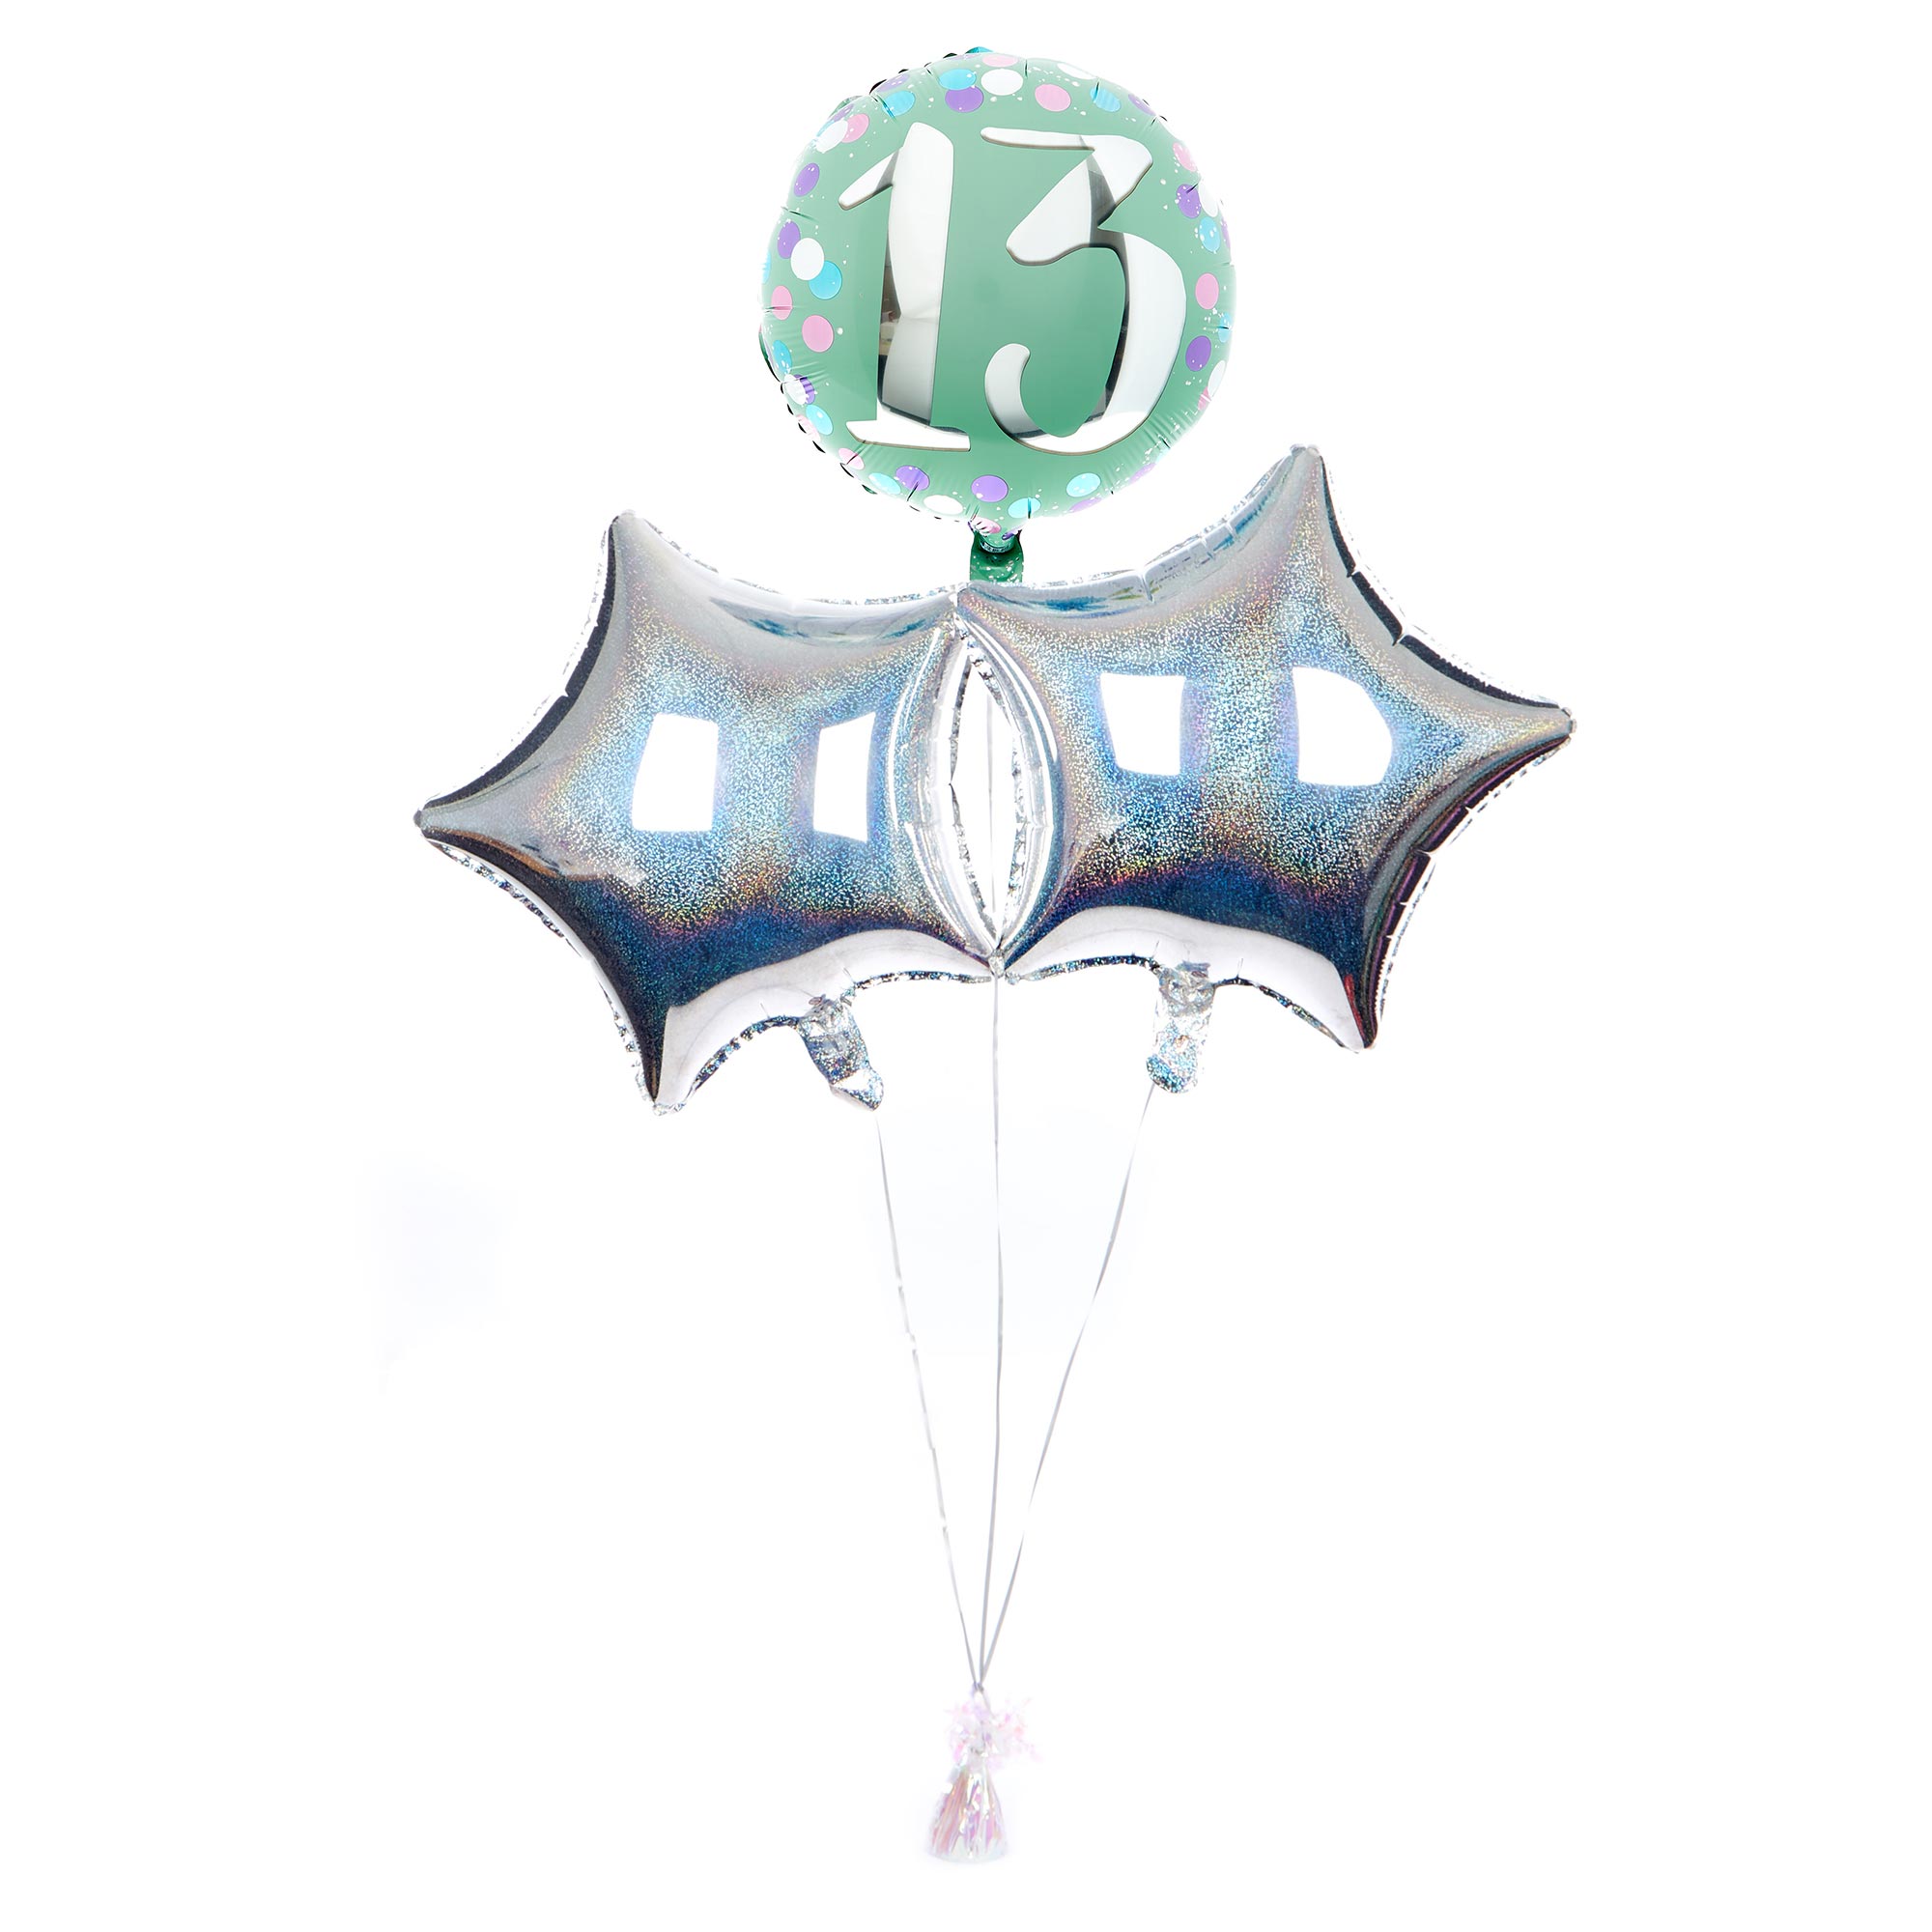 Mint Green 13th Birthday Balloon Bouquet - DELIVERED INFLATED!